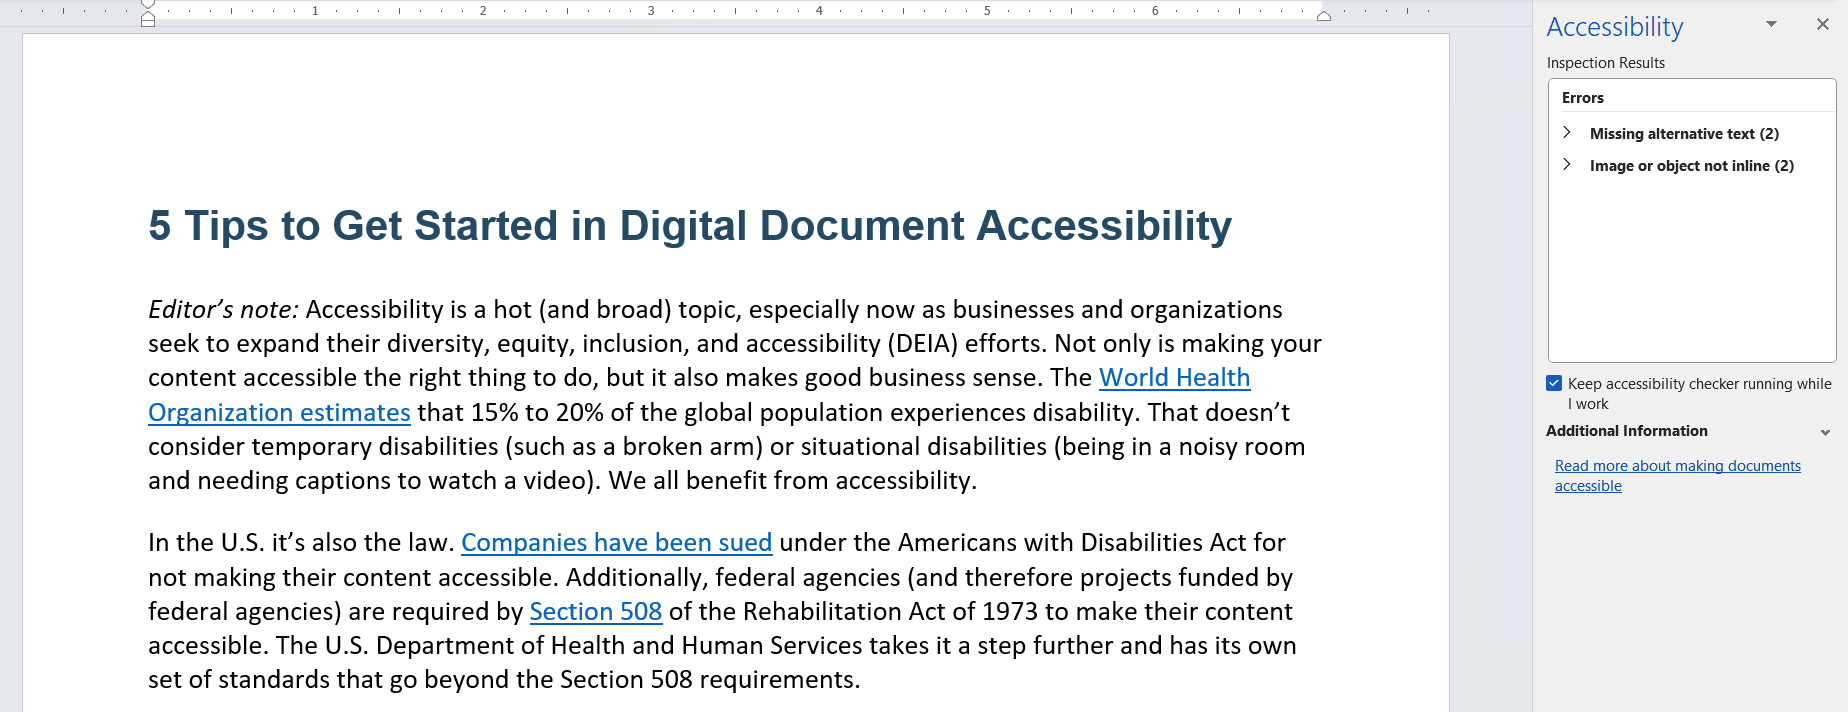 A basic accessibility test is run using Microsoft Word's accessibility checker.